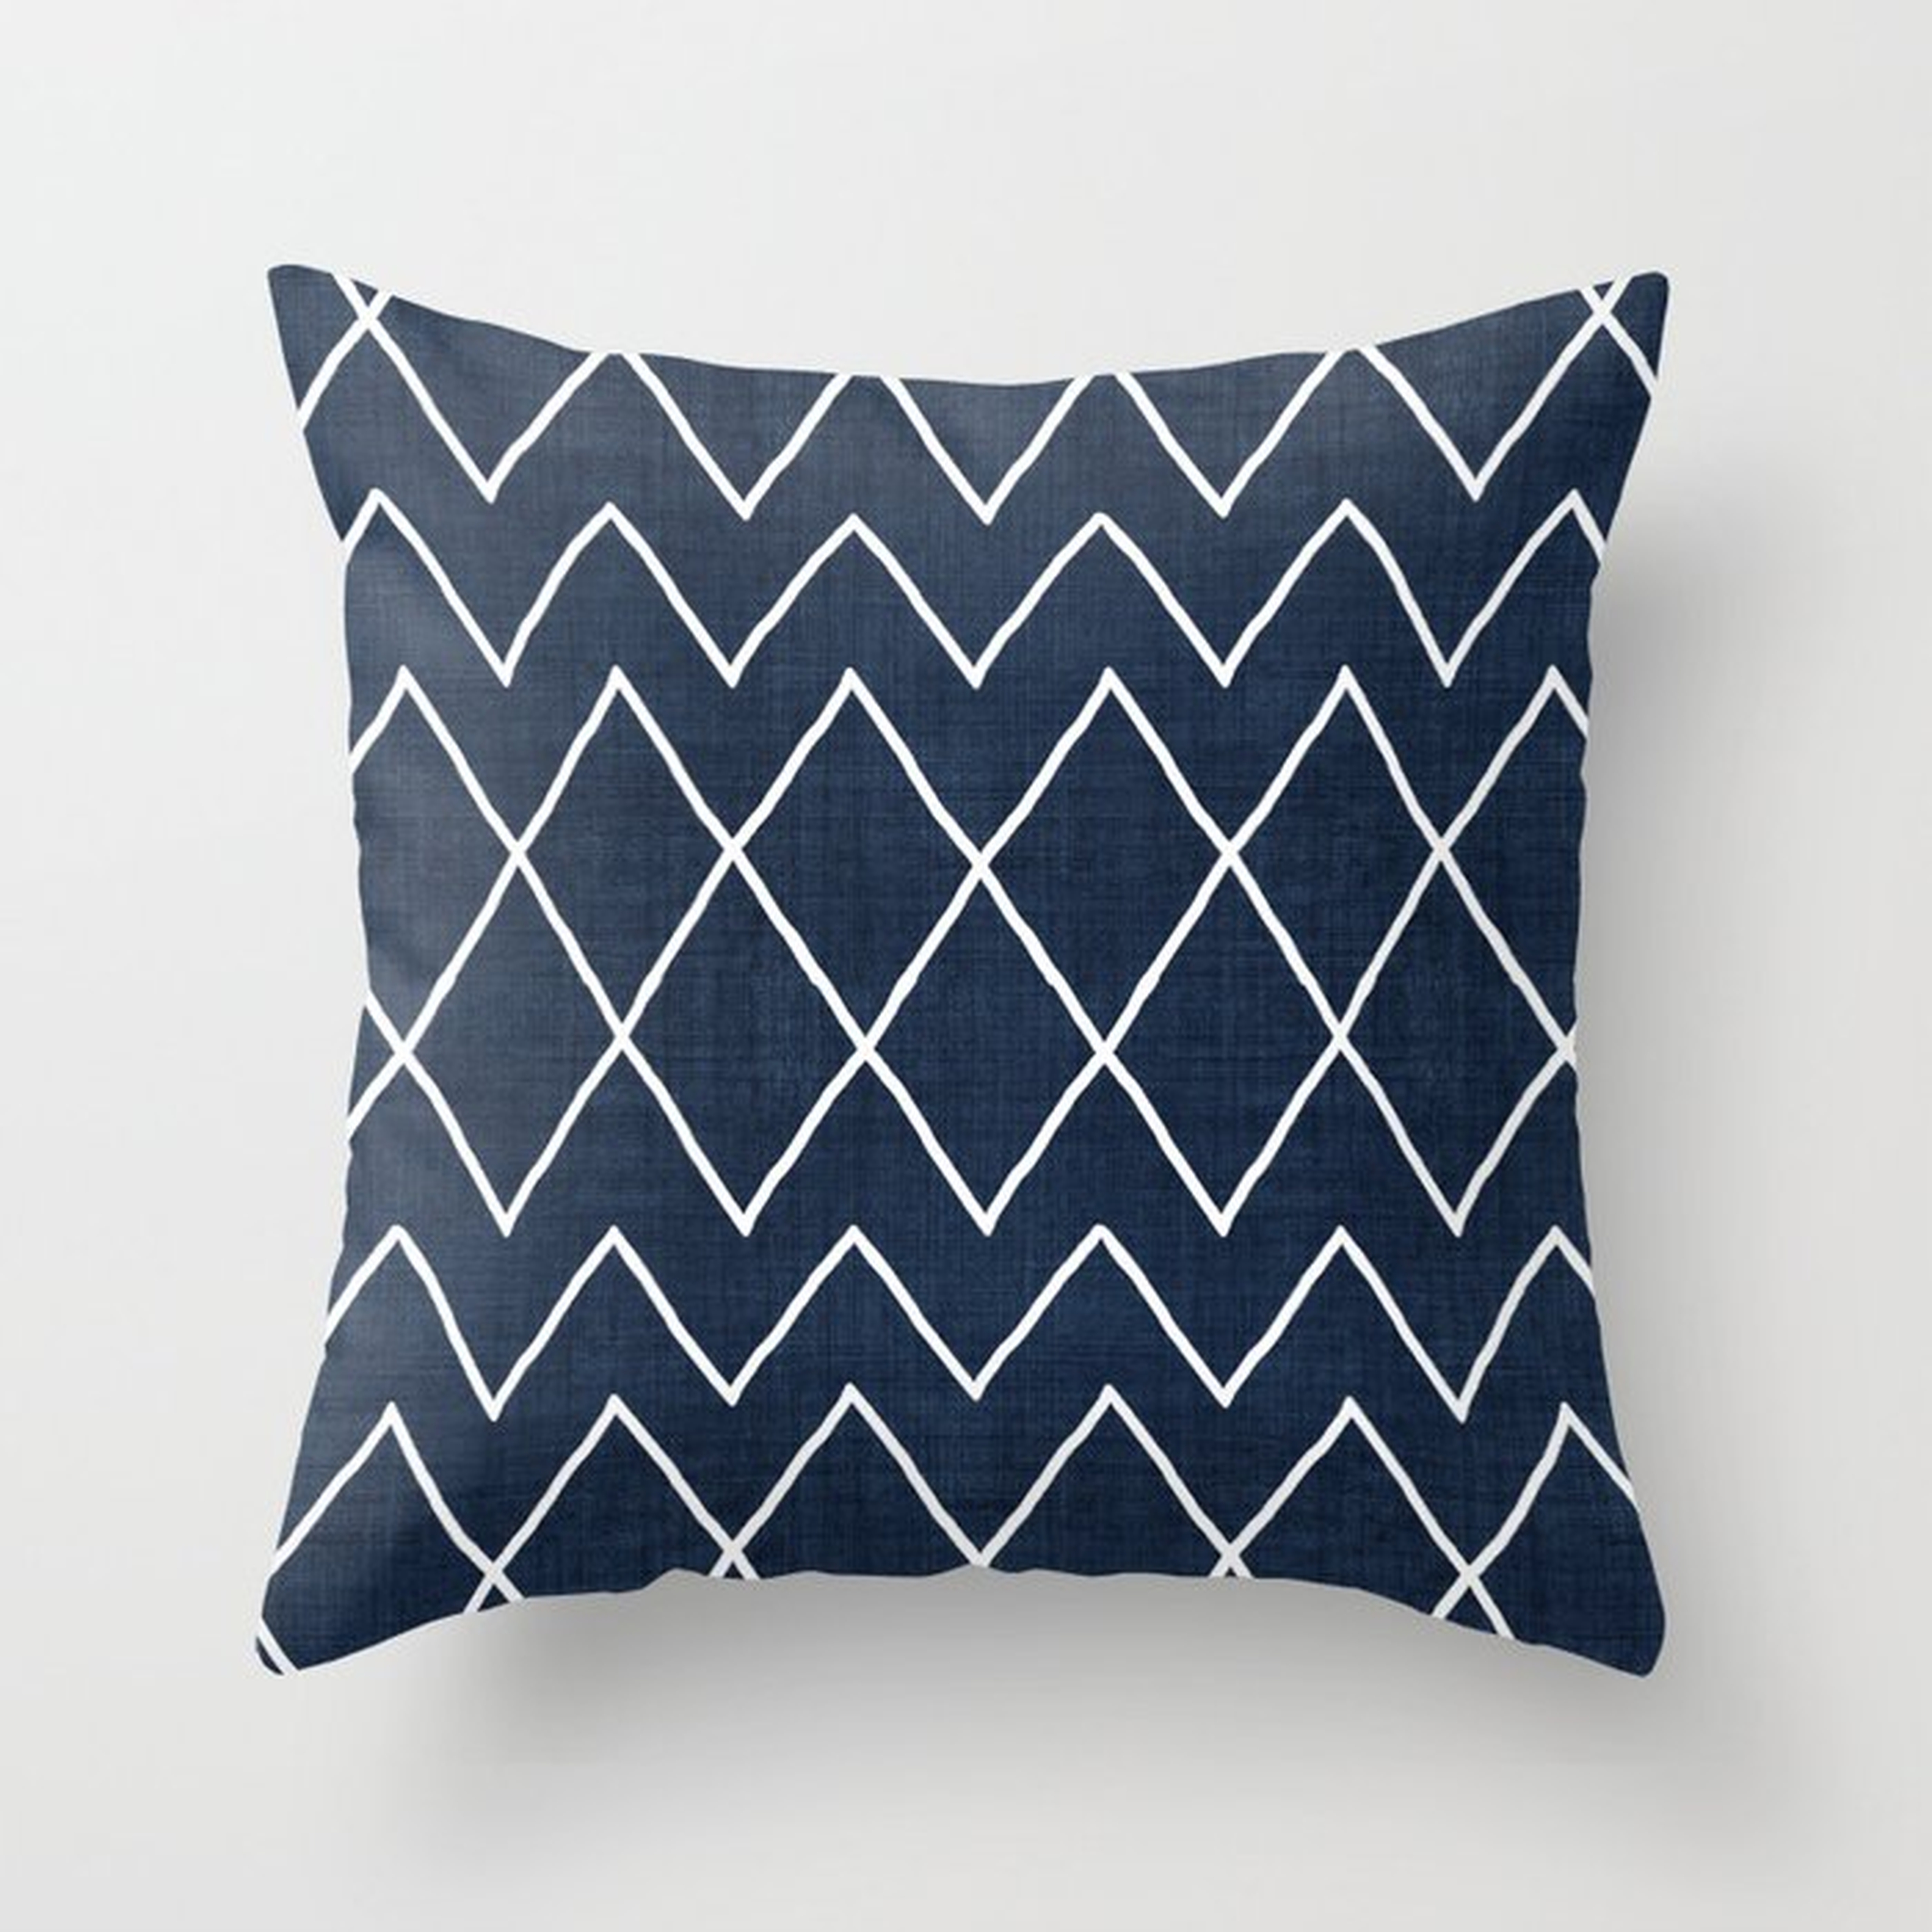 Avoca In Navy Couch Throw Pillow by Becky Bailey - Cover (20" x 20") with pillow insert - Outdoor Pillow - Society6